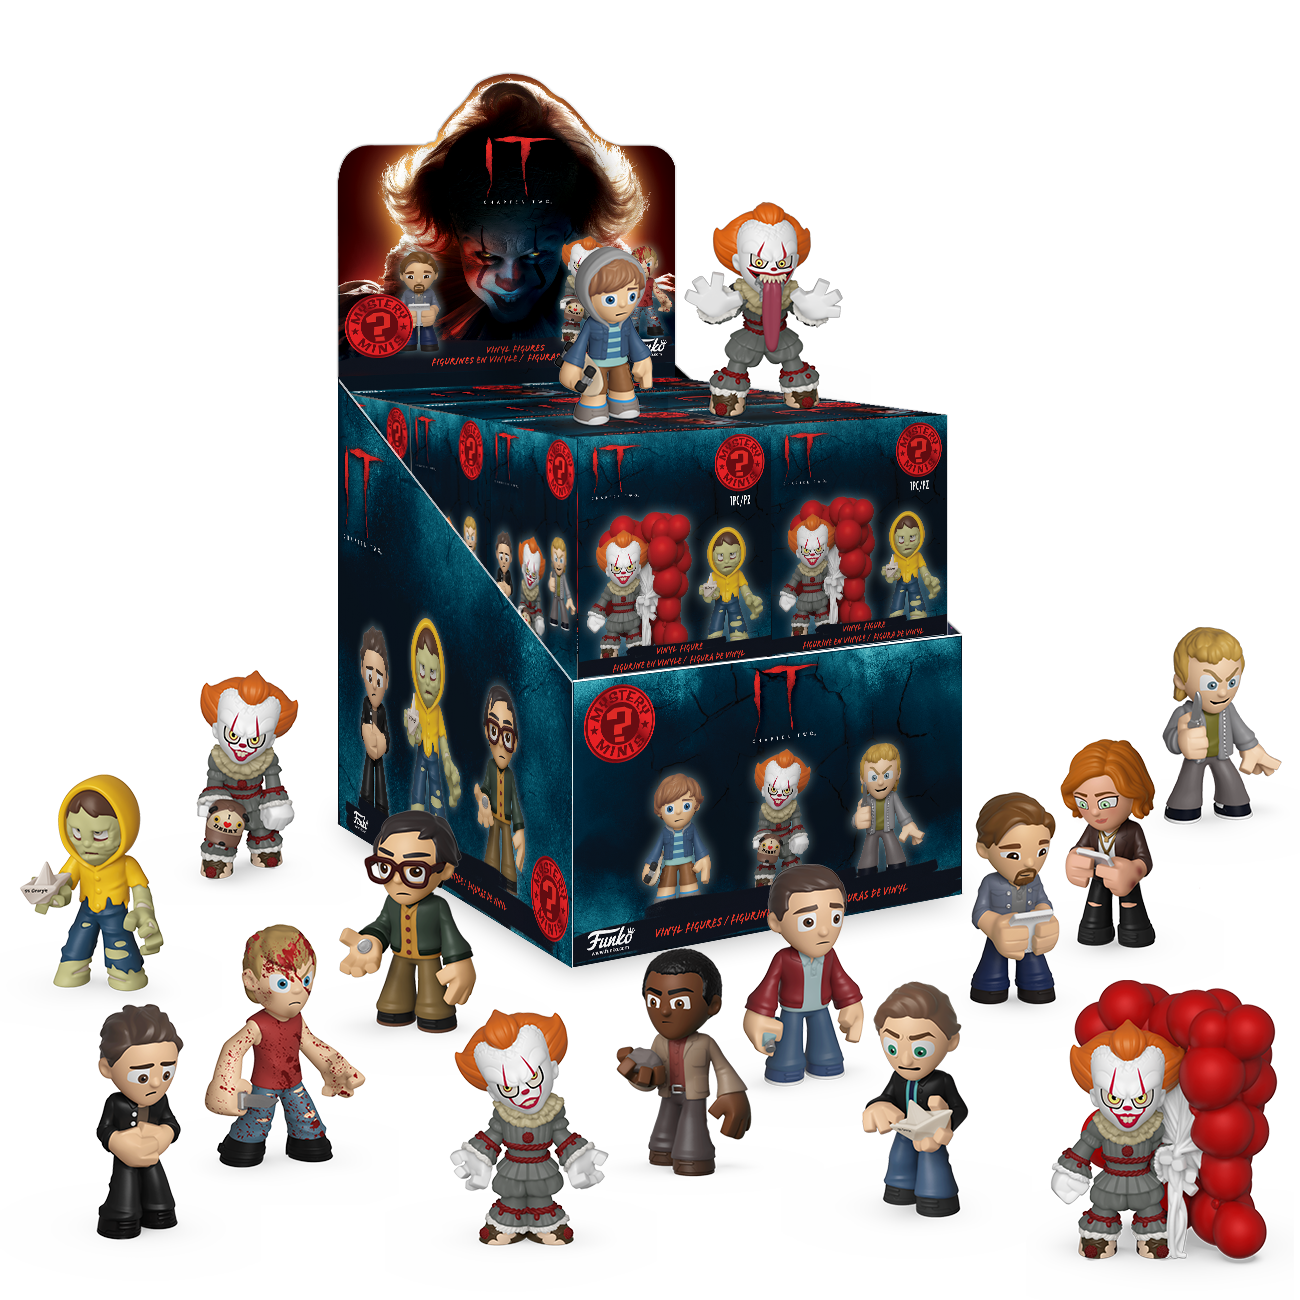 ad icons mystery minis gamestop